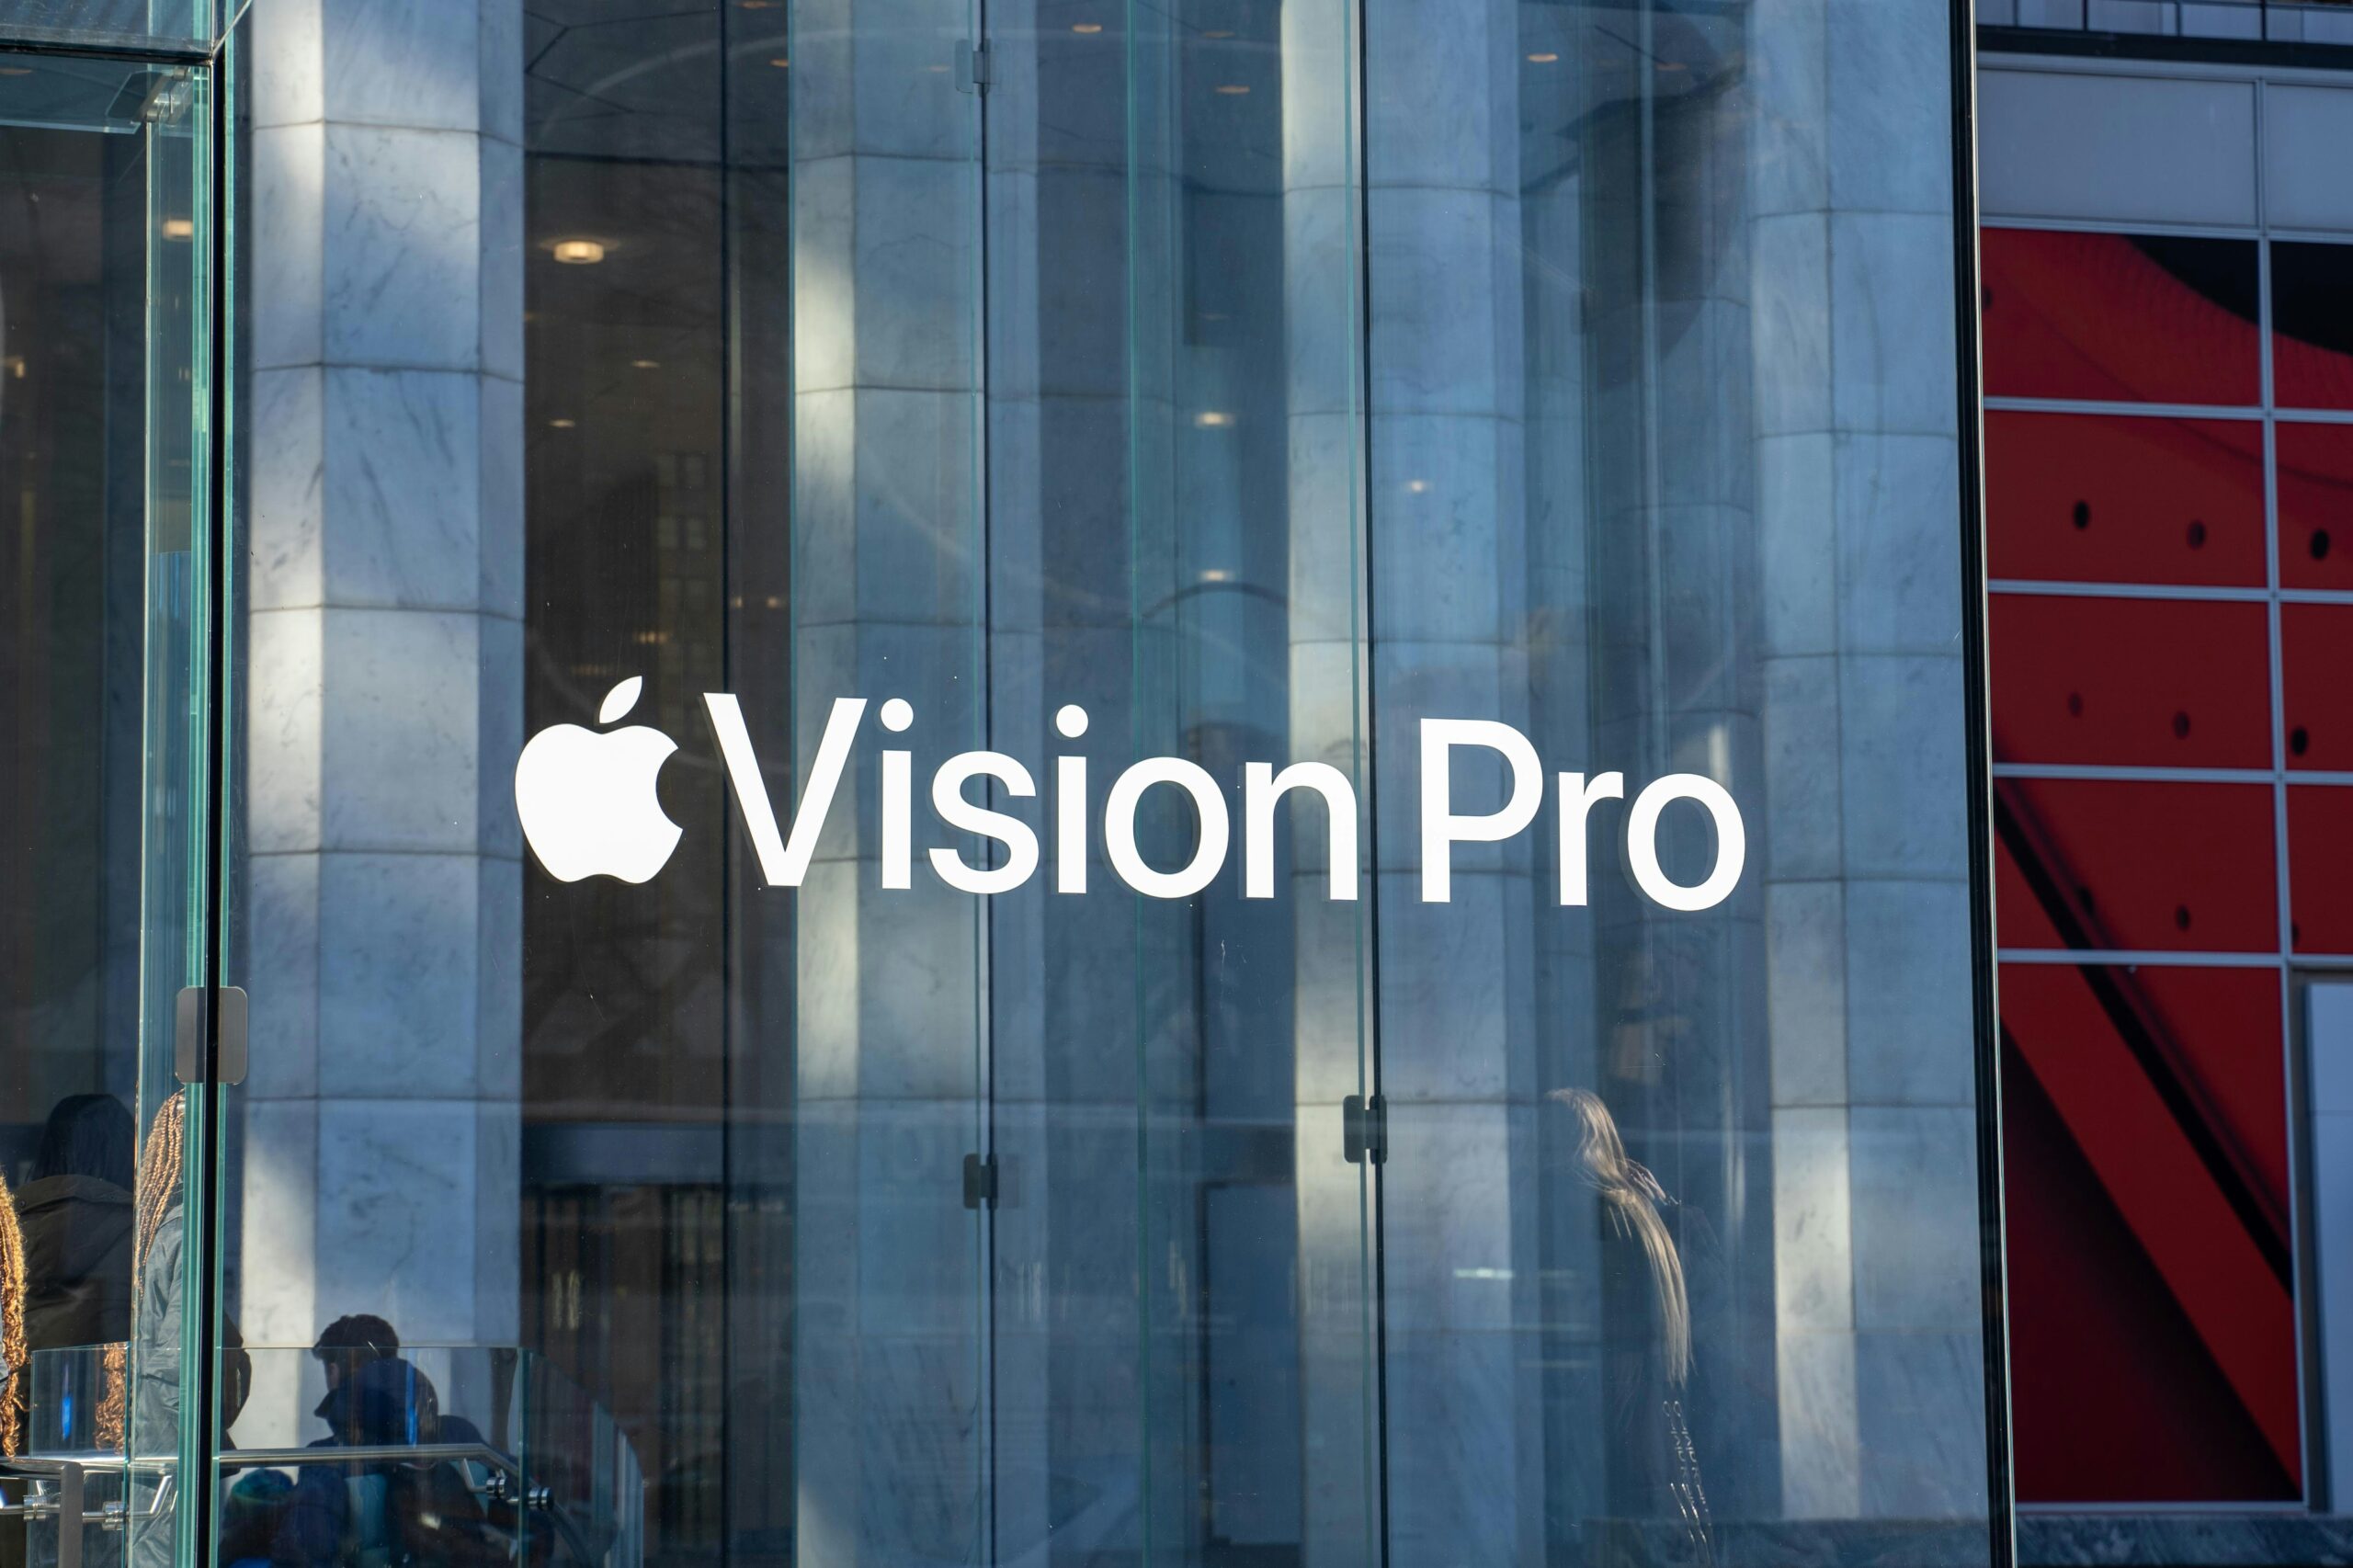 Apple Vision Pro: A New Innovation or Not?